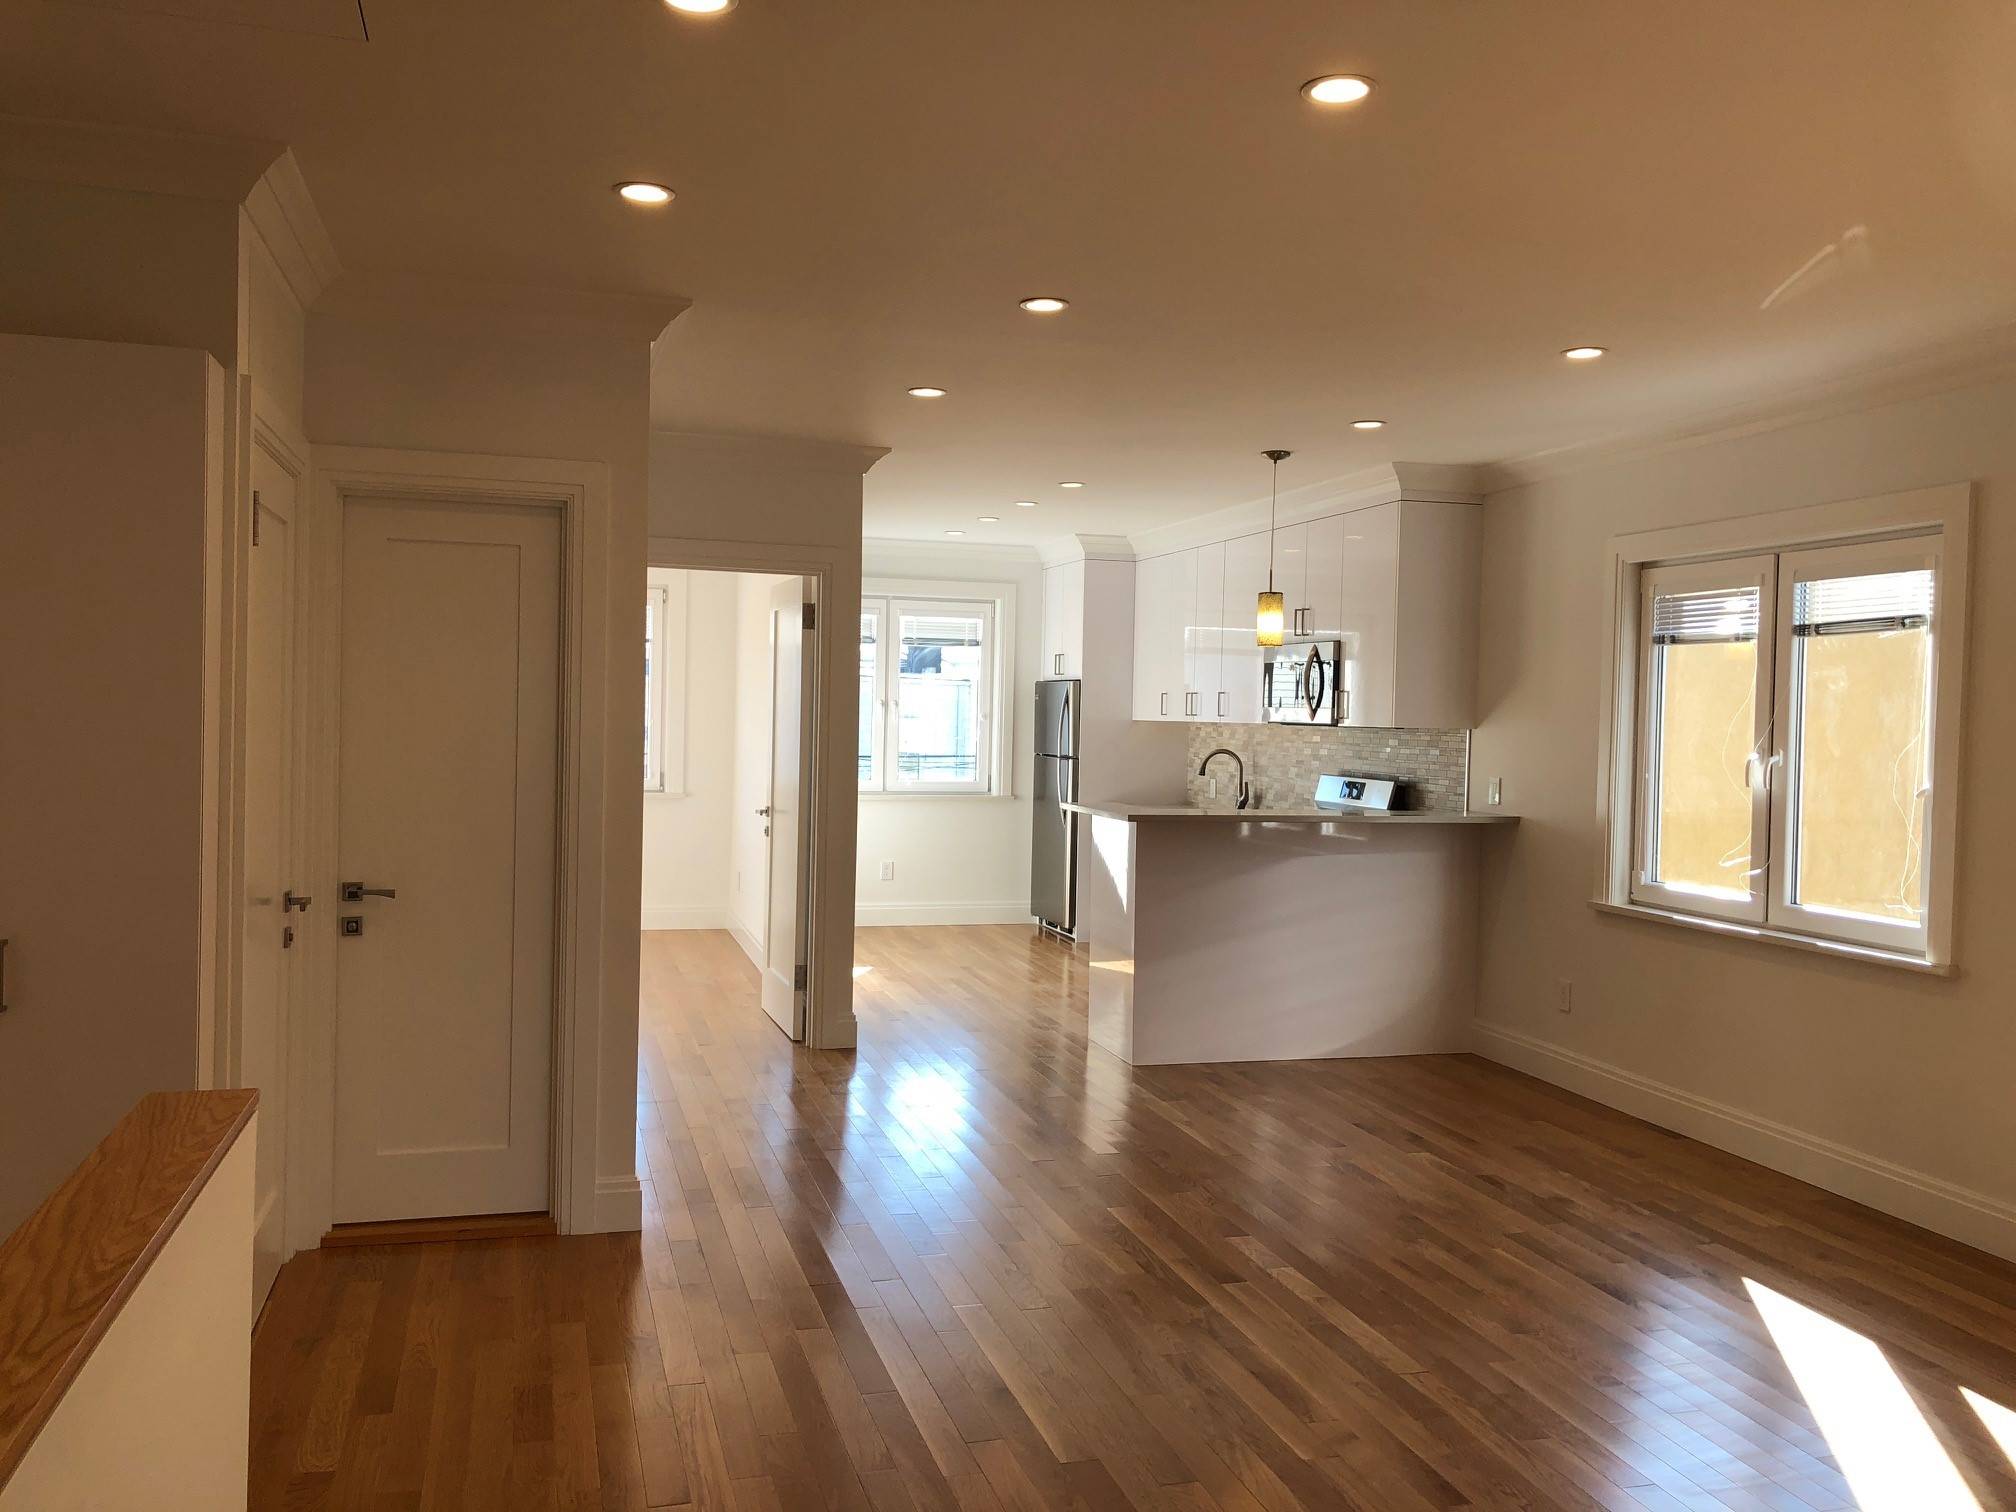 Stunning Newly Renovated 3 Bedroom Apartment With Condo Finishes in Maspeth!